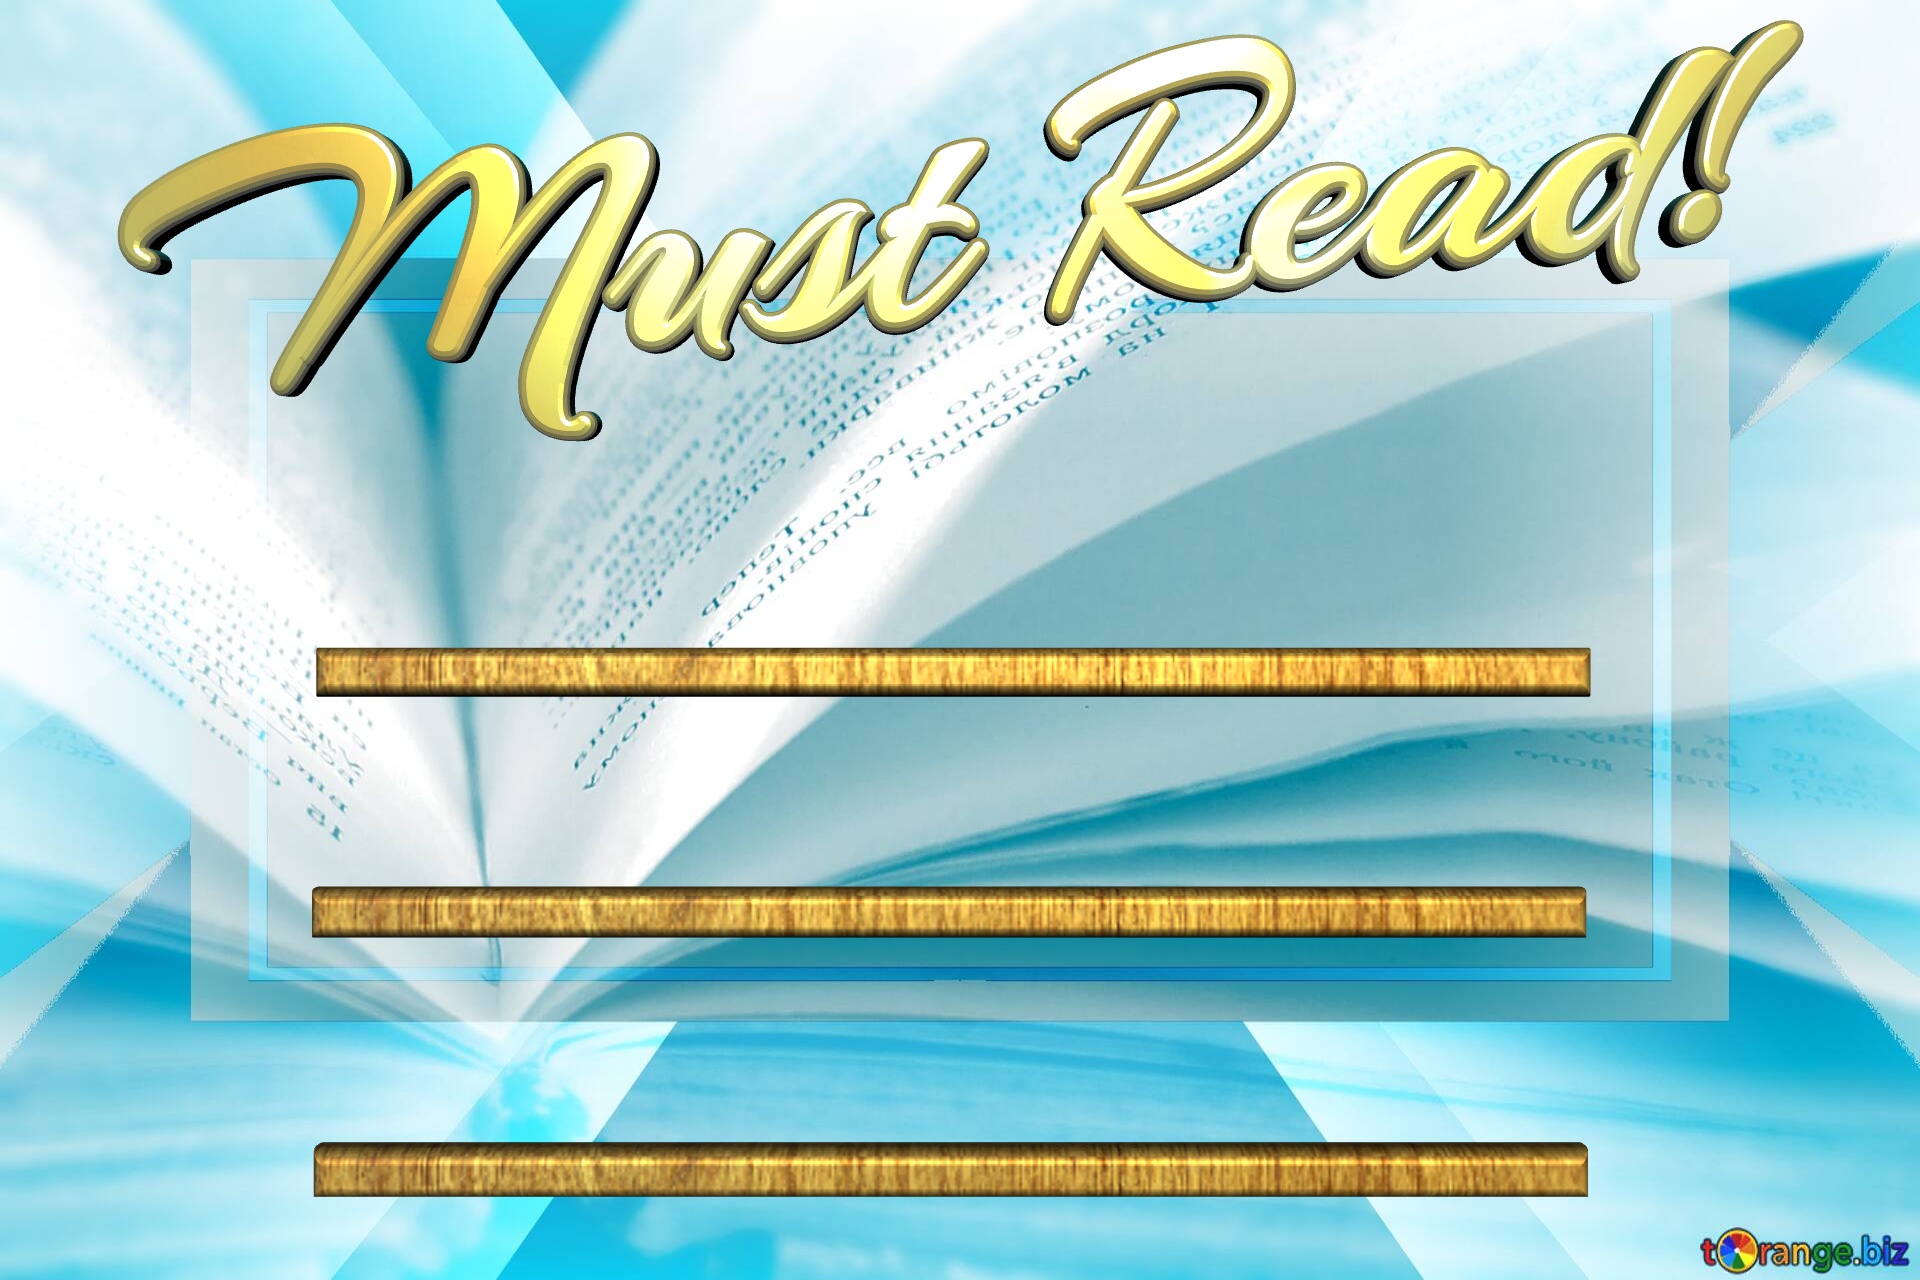 Must read books powerpoint template background №0